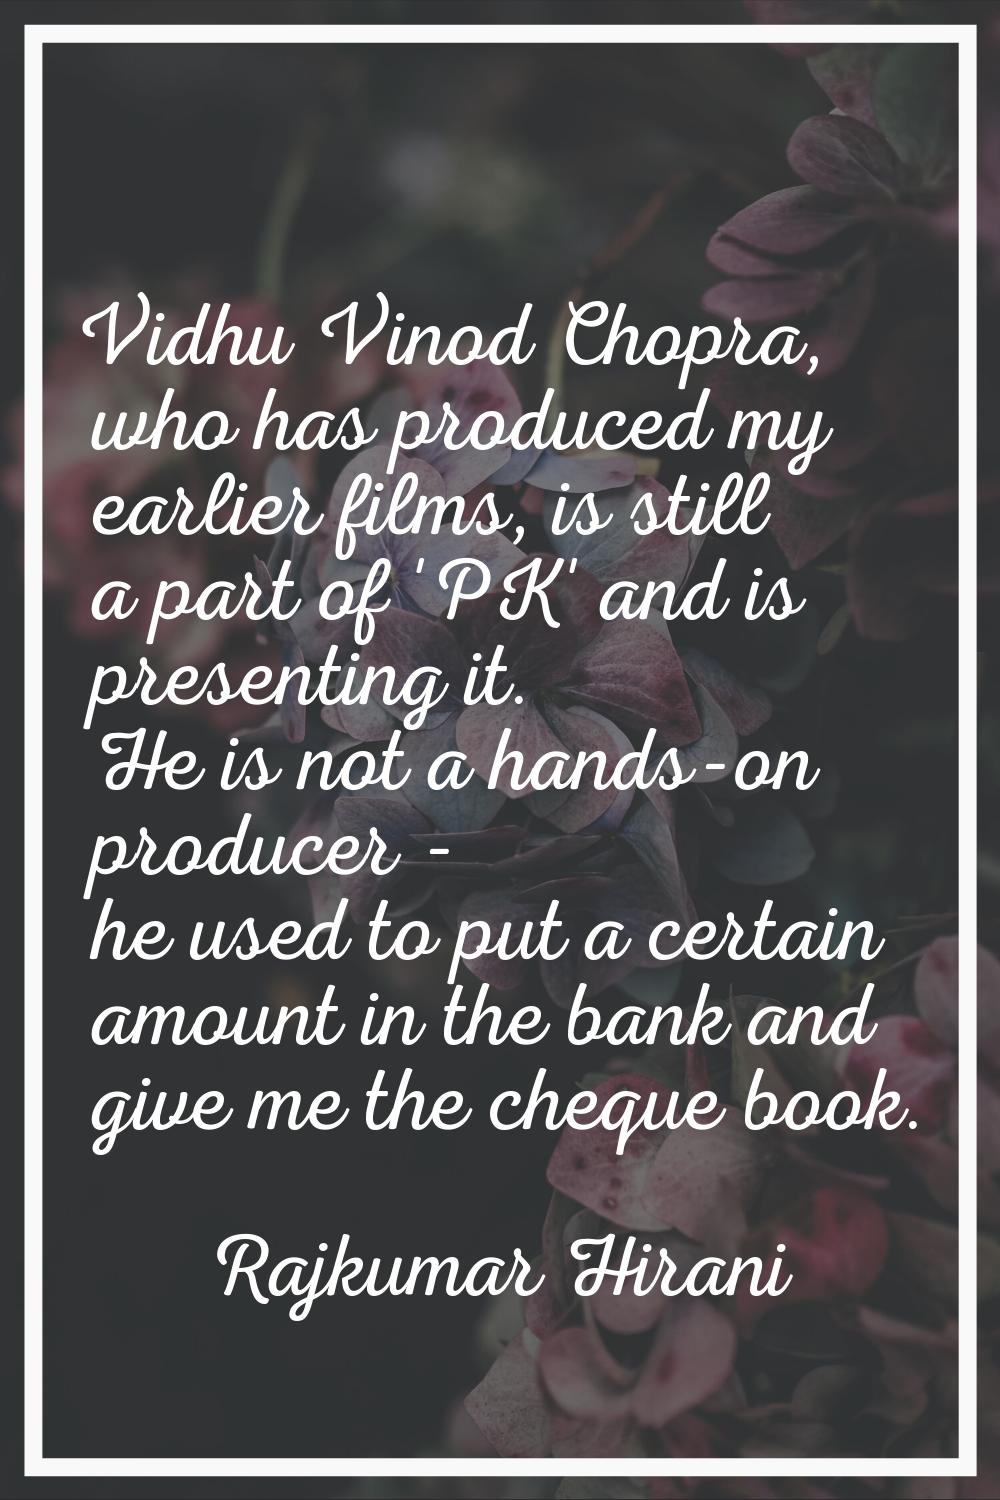 Vidhu Vinod Chopra, who has produced my earlier films, is still a part of 'PK' and is presenting it